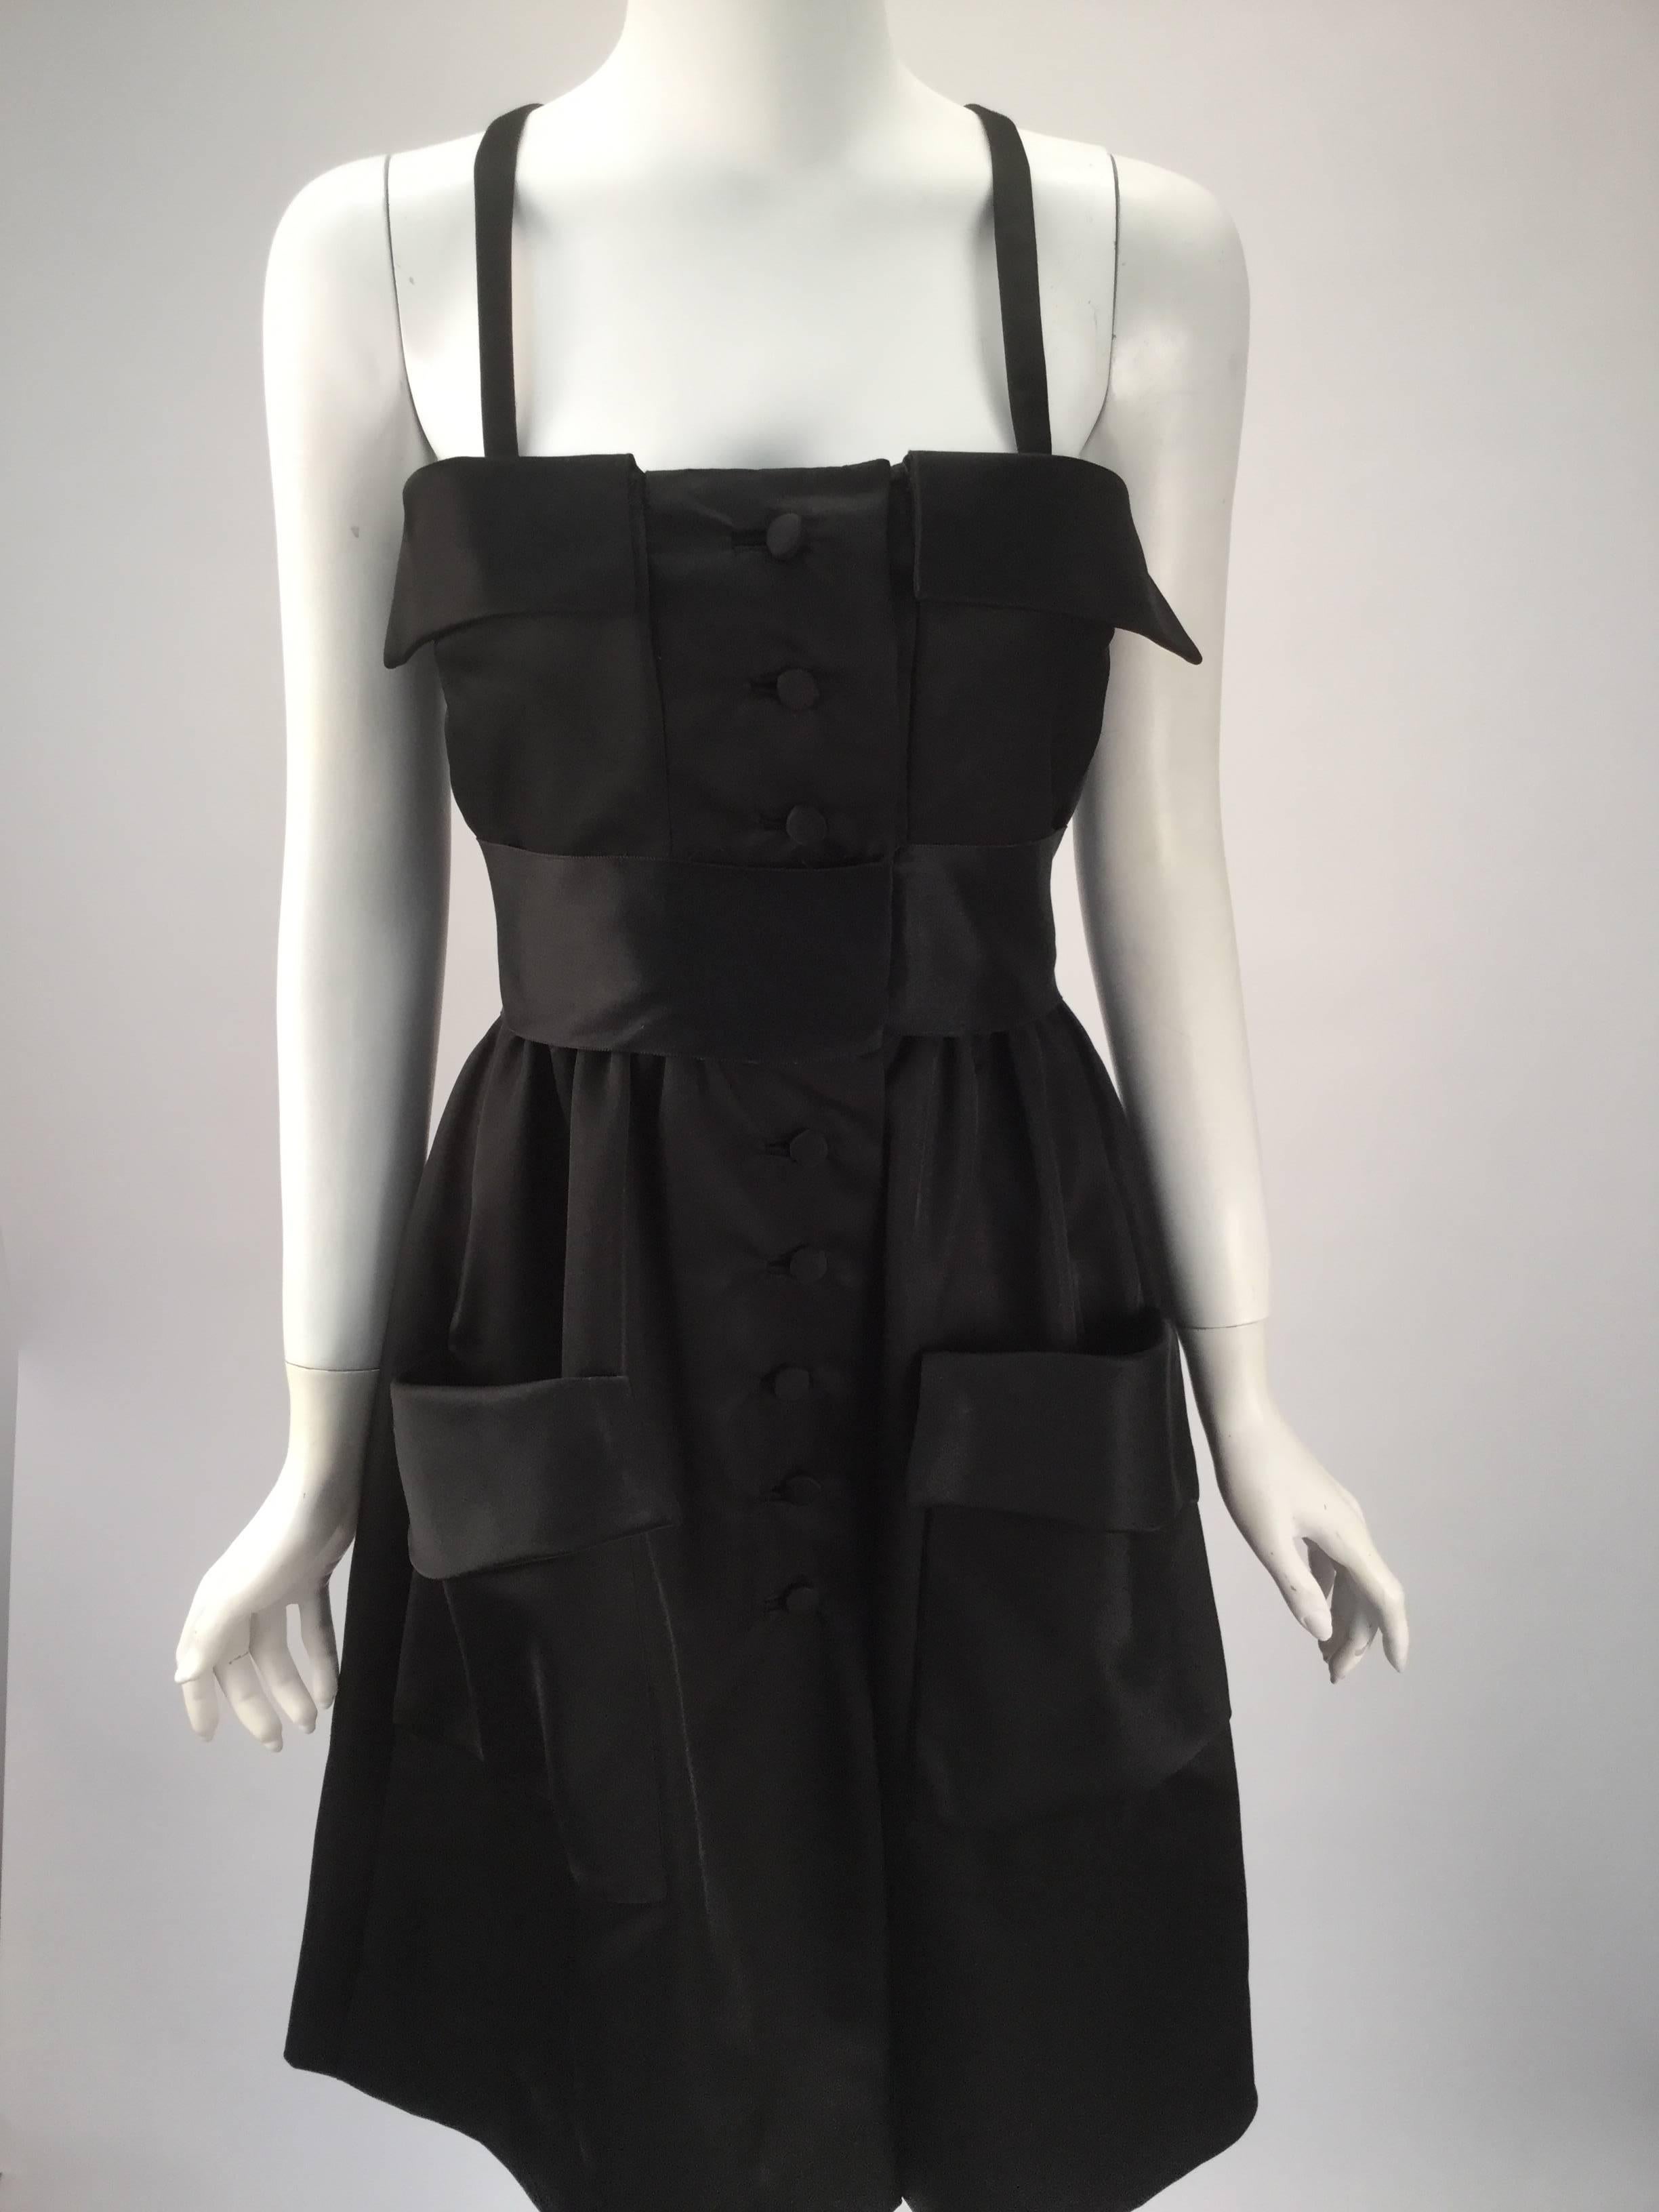 Gorgeous and uber-comfortable black satin dress with two large pockets center front. Black satin sash sits as an empire waist. The front of the dress has two fold-over flaps on the top of the dress. Eight buttons run from top until mid thigh.